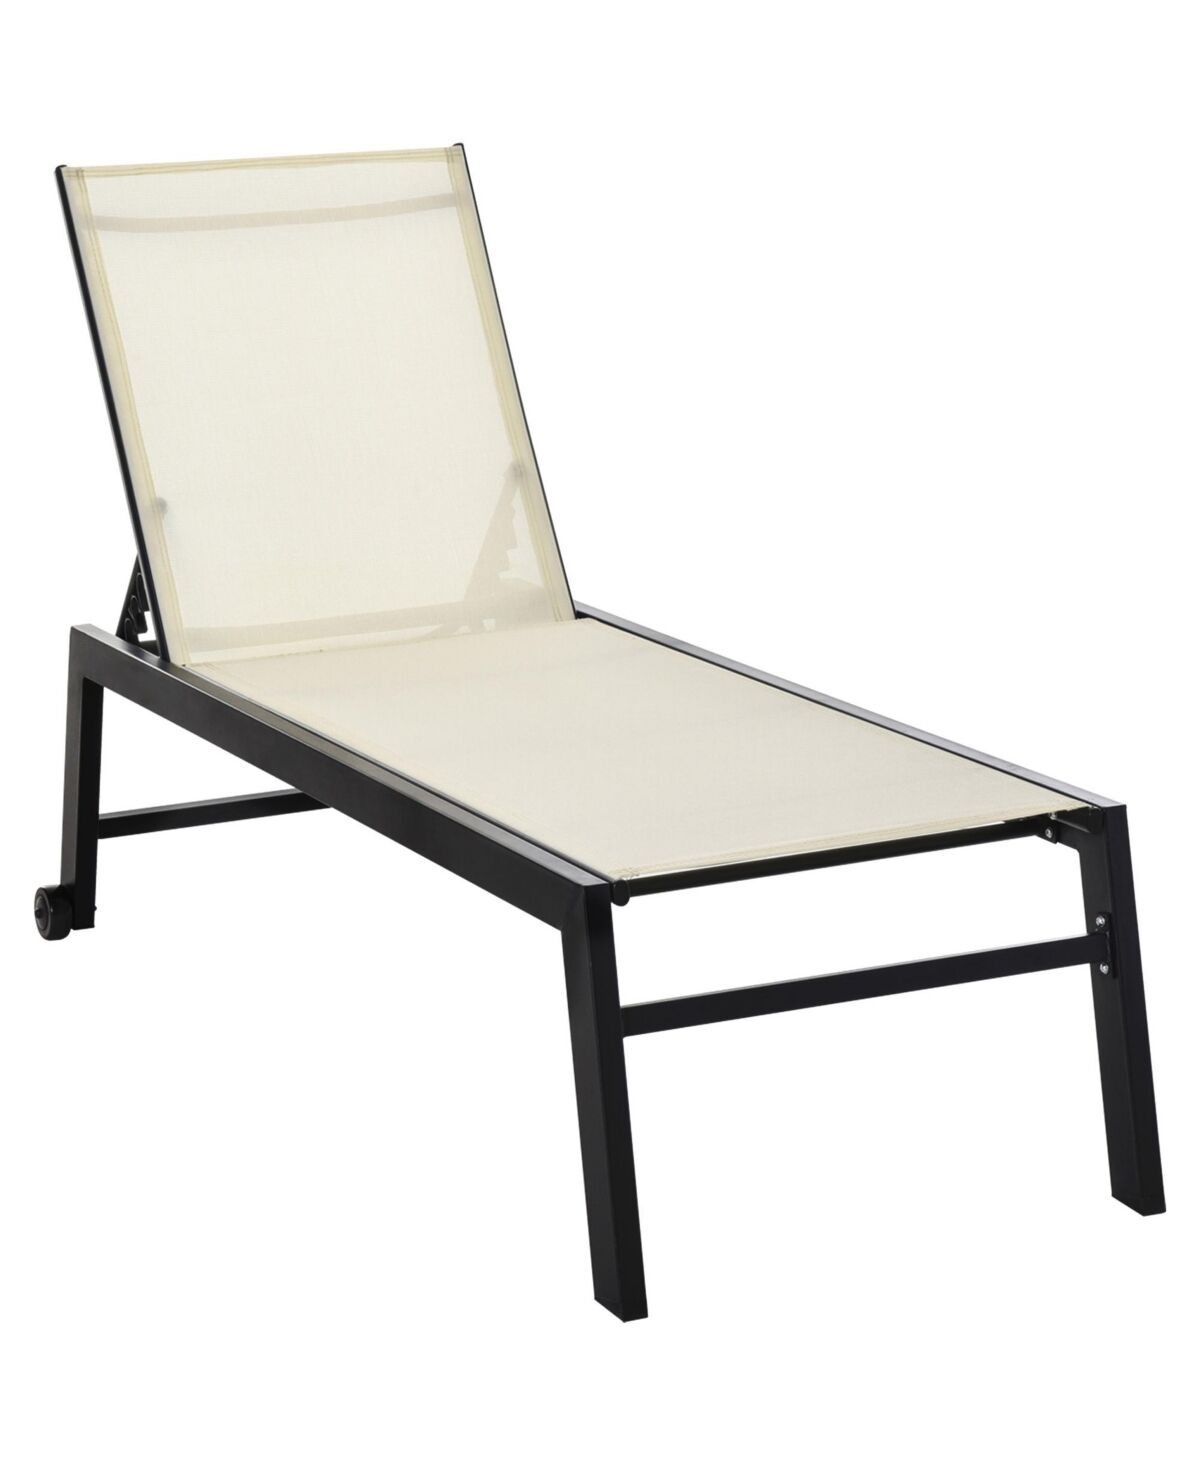 Outsunny Patio Garden Sun Chaise Lounge Chair with 5-Position Backrest, 2 Back Wheels, & Industrial Design, Cream White - Cream white